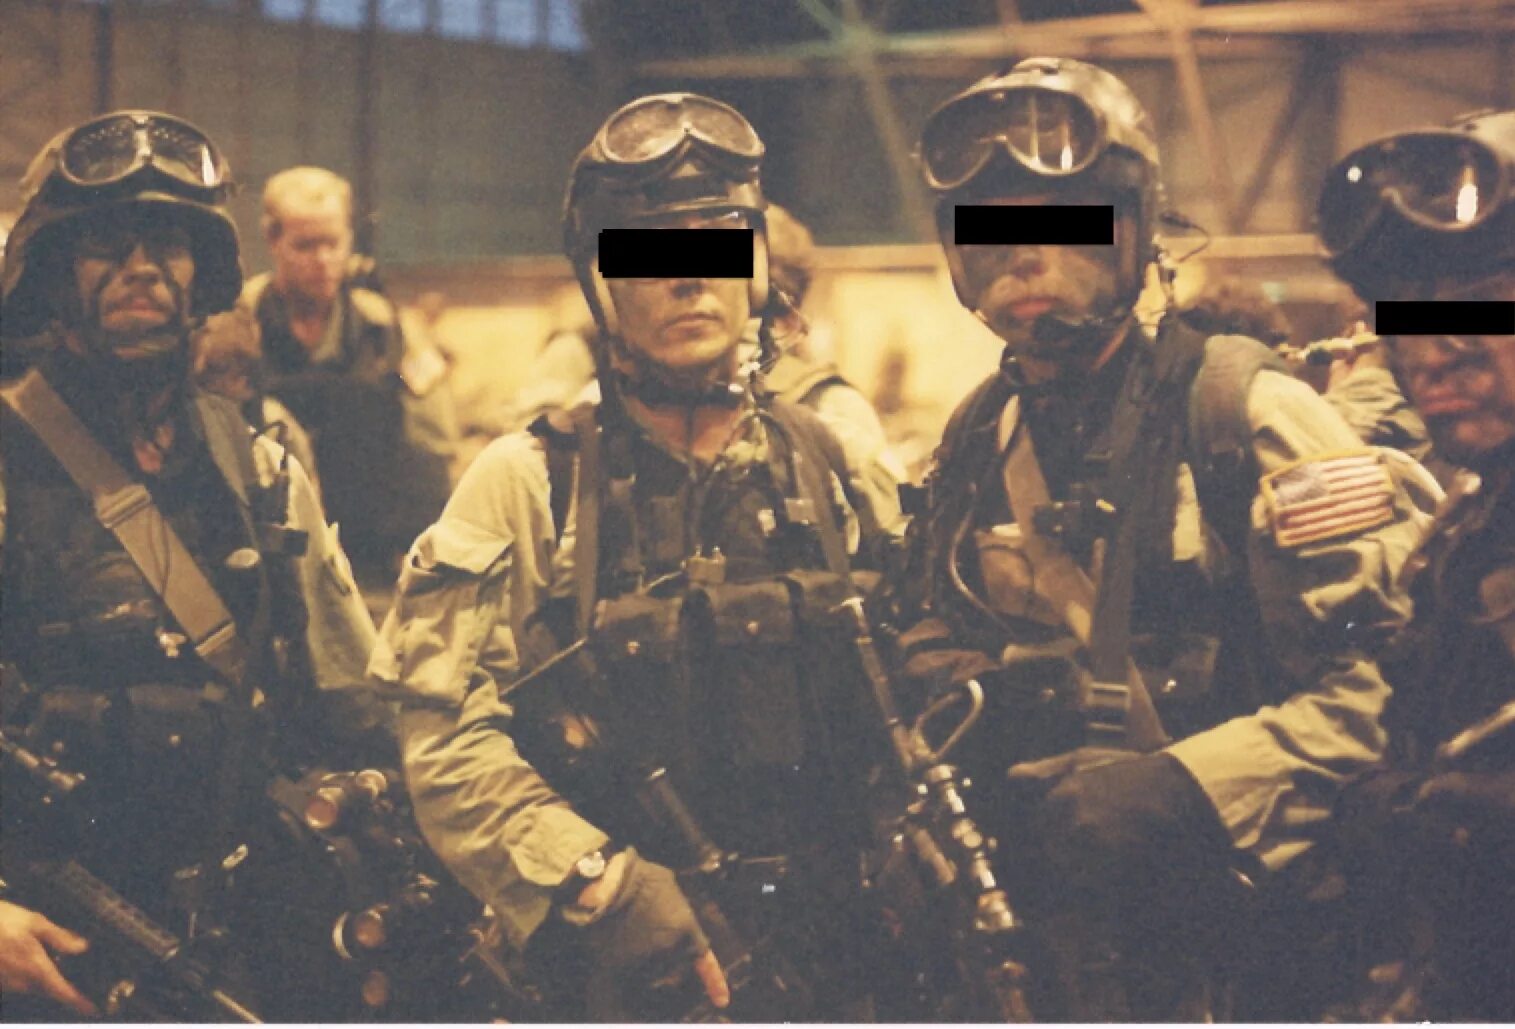 Us Army 1st SFOD-Delta 2001. Operation just cause 1989. Delta Force 1993 снаряжение. SFOD-D Delta 90s.